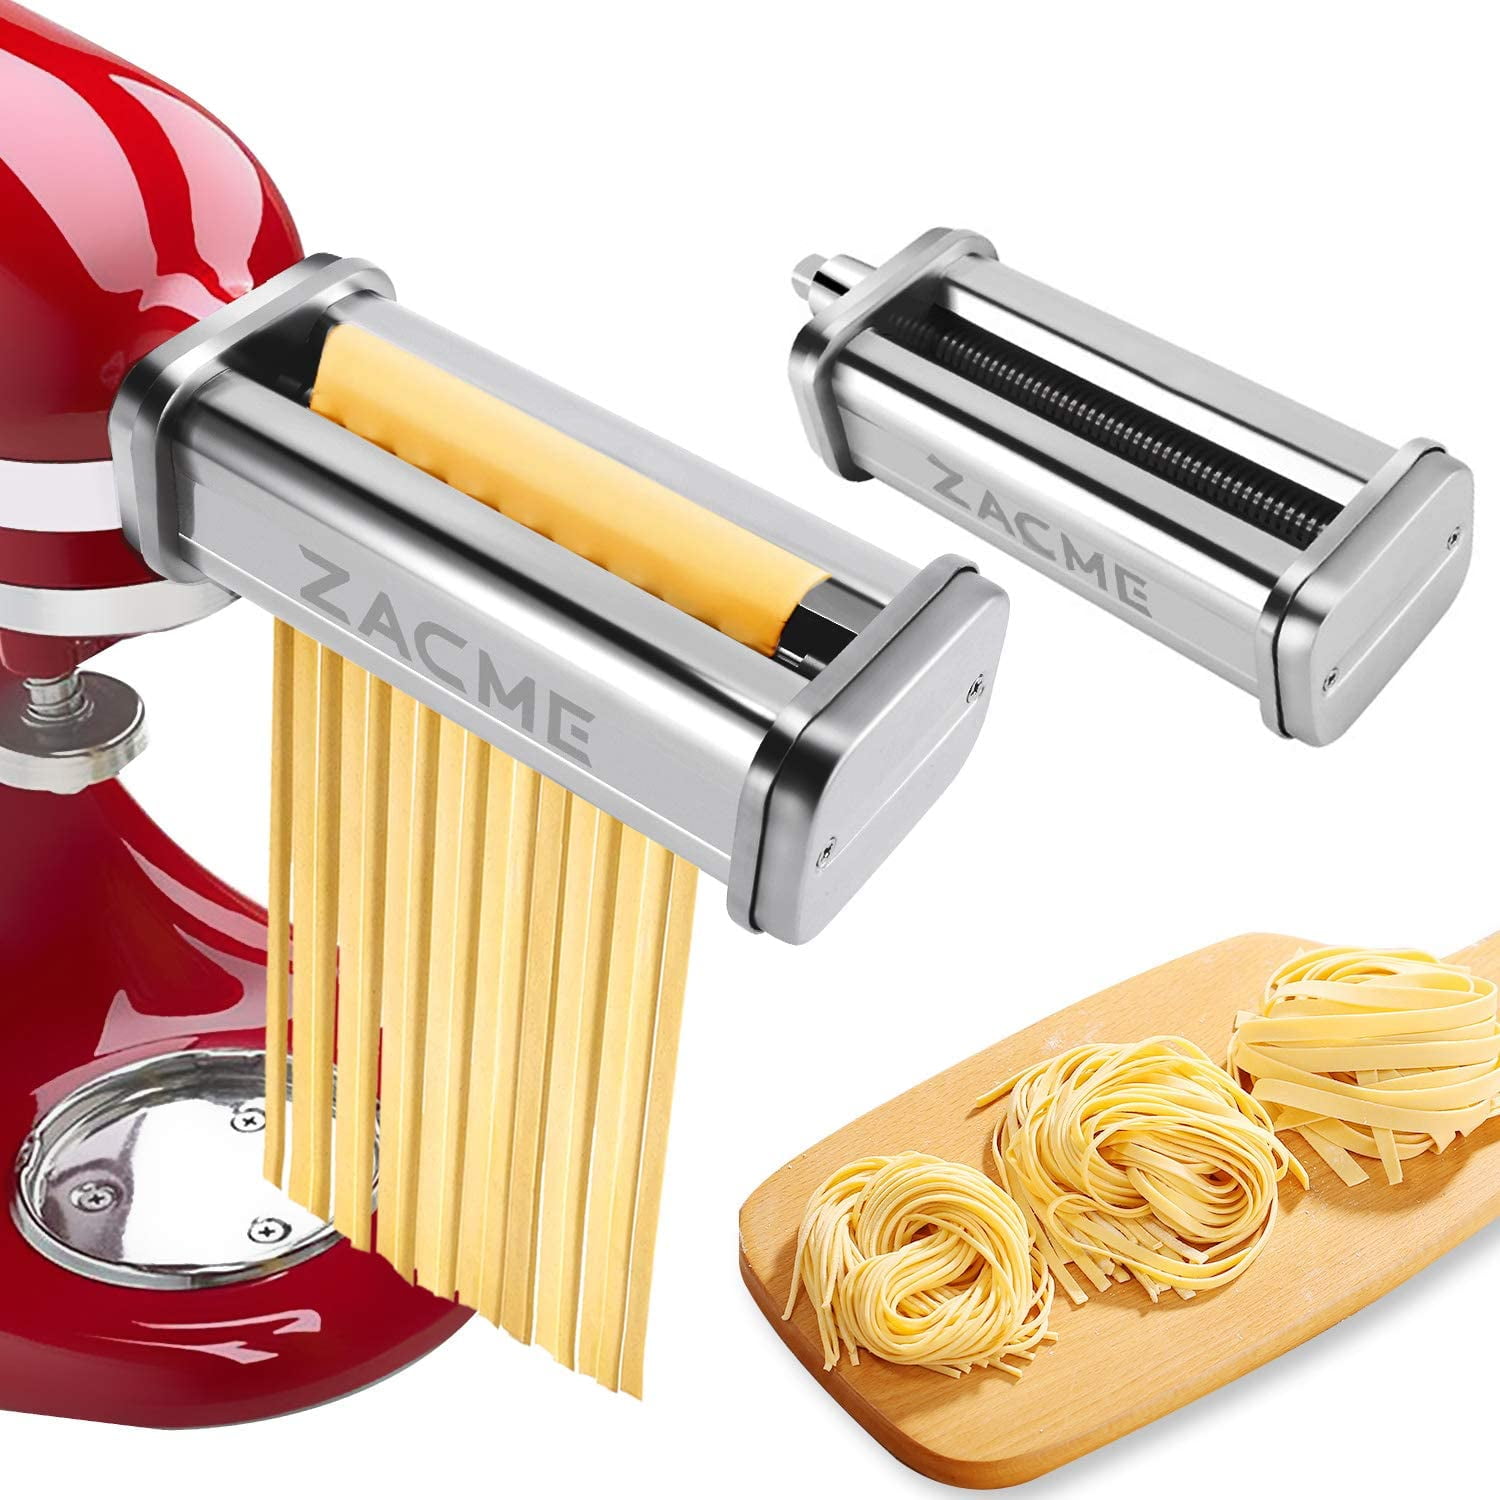 Stainless Steel Pasta Roller & Cutter Set Attachment for KitchenAid Stand Mixers